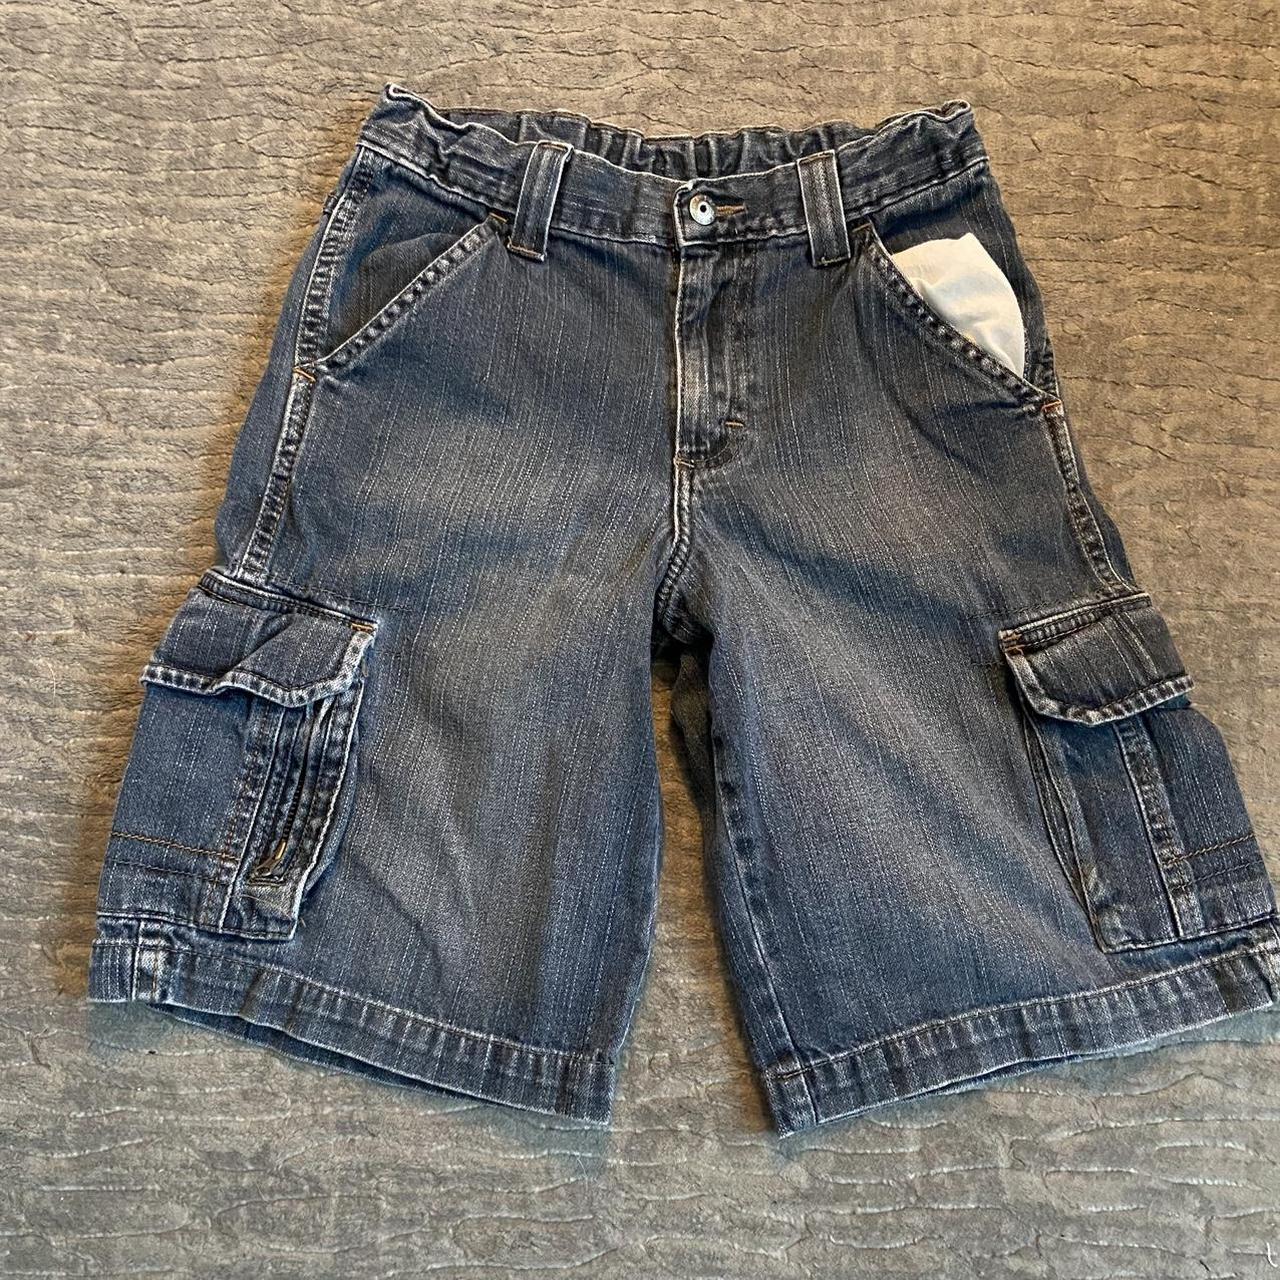 Wrg Jeans Co Jorts. Good condition. Message for... - Depop